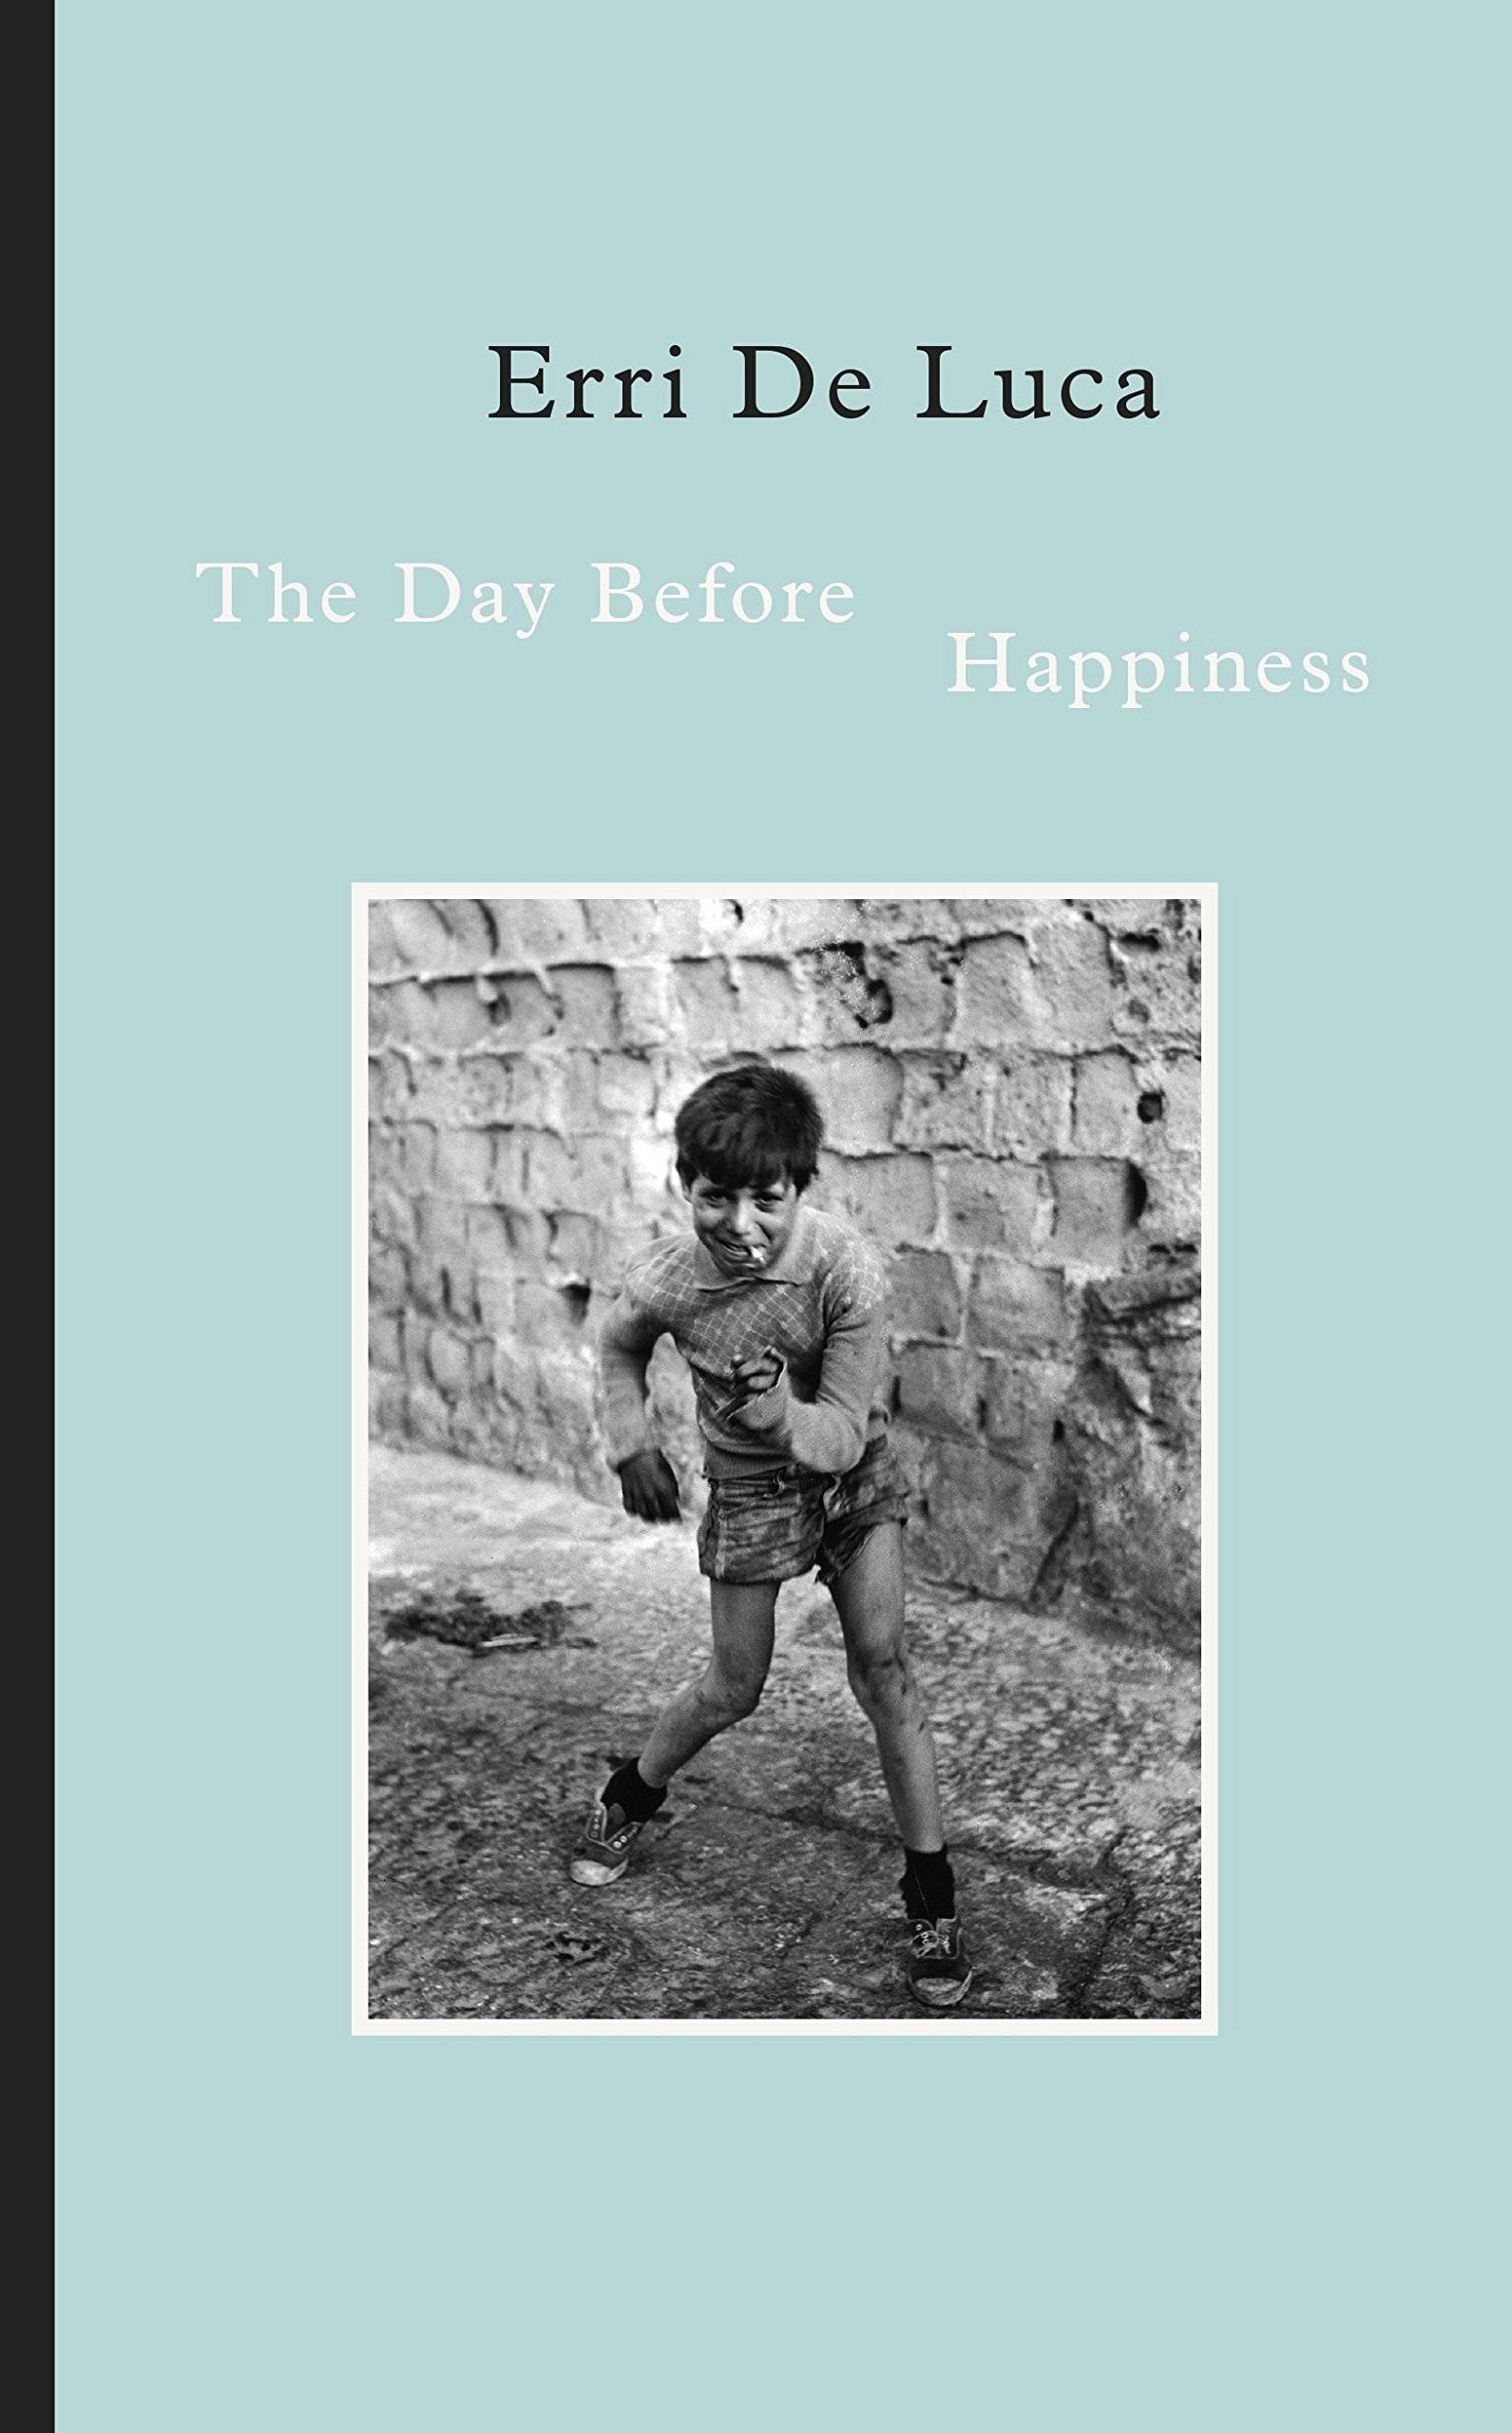 The Day Before Happiness by Erri De Luca